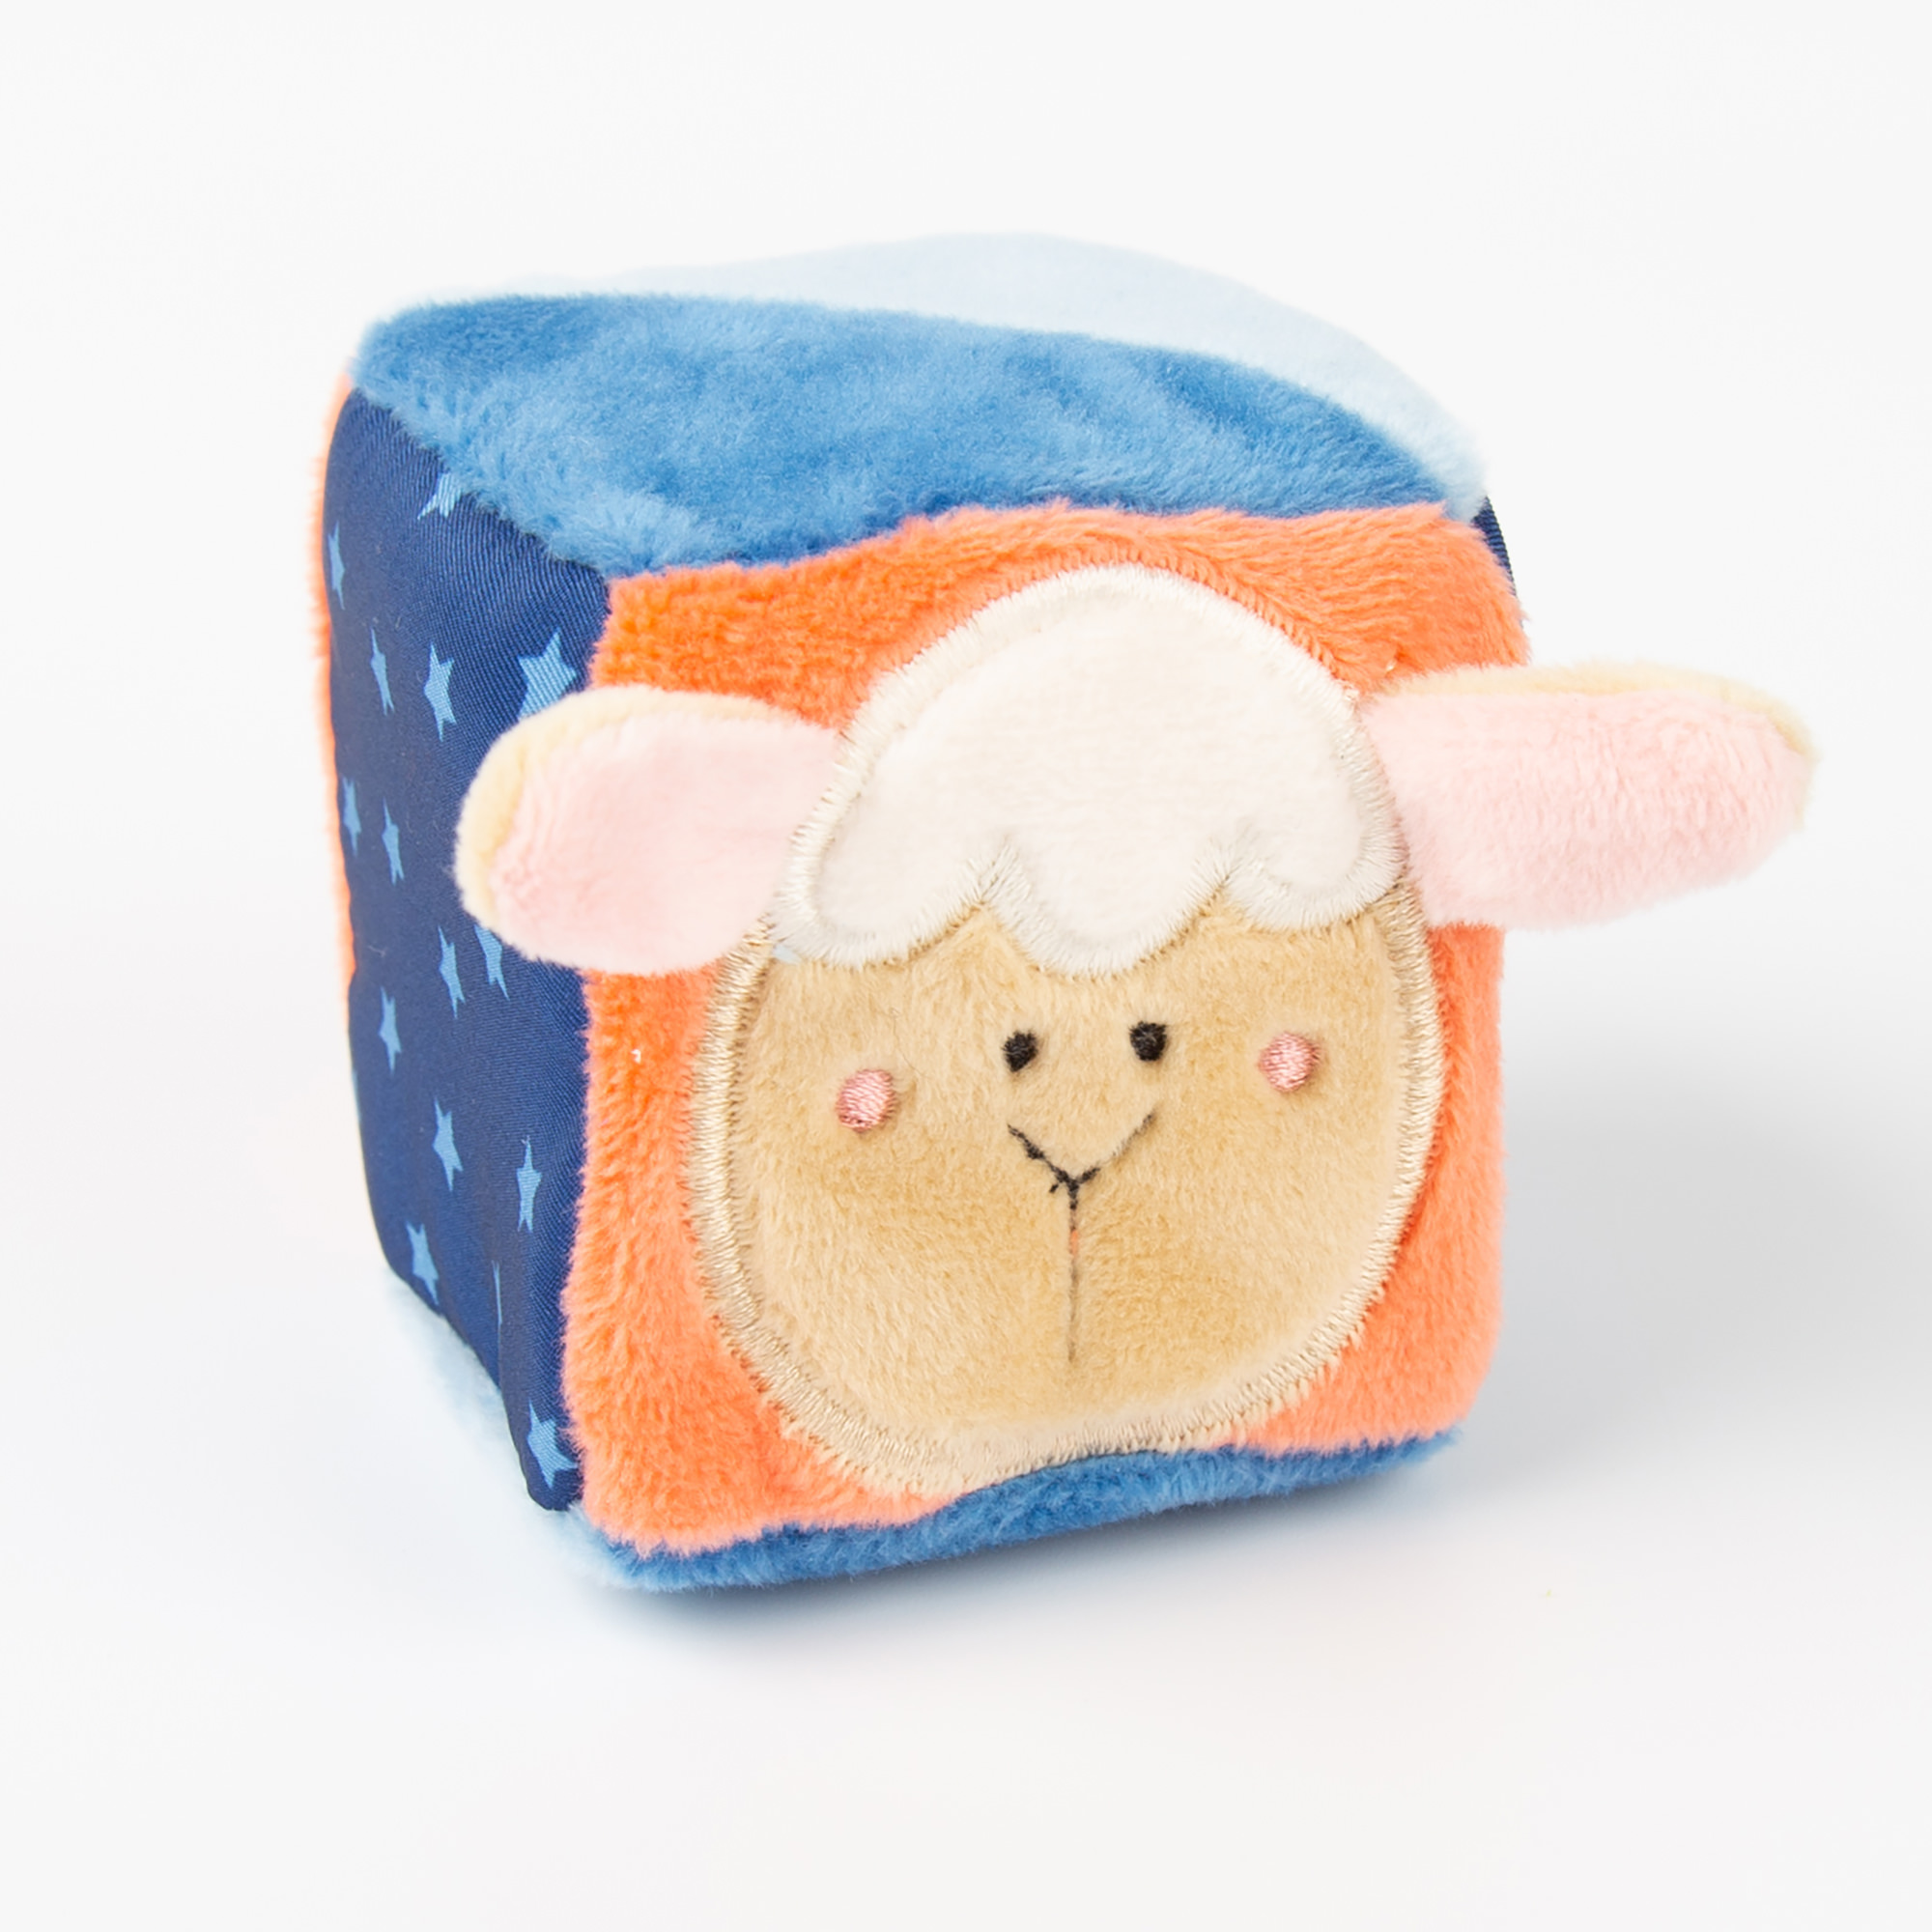 Rattle squeaker soft toy cube dice set